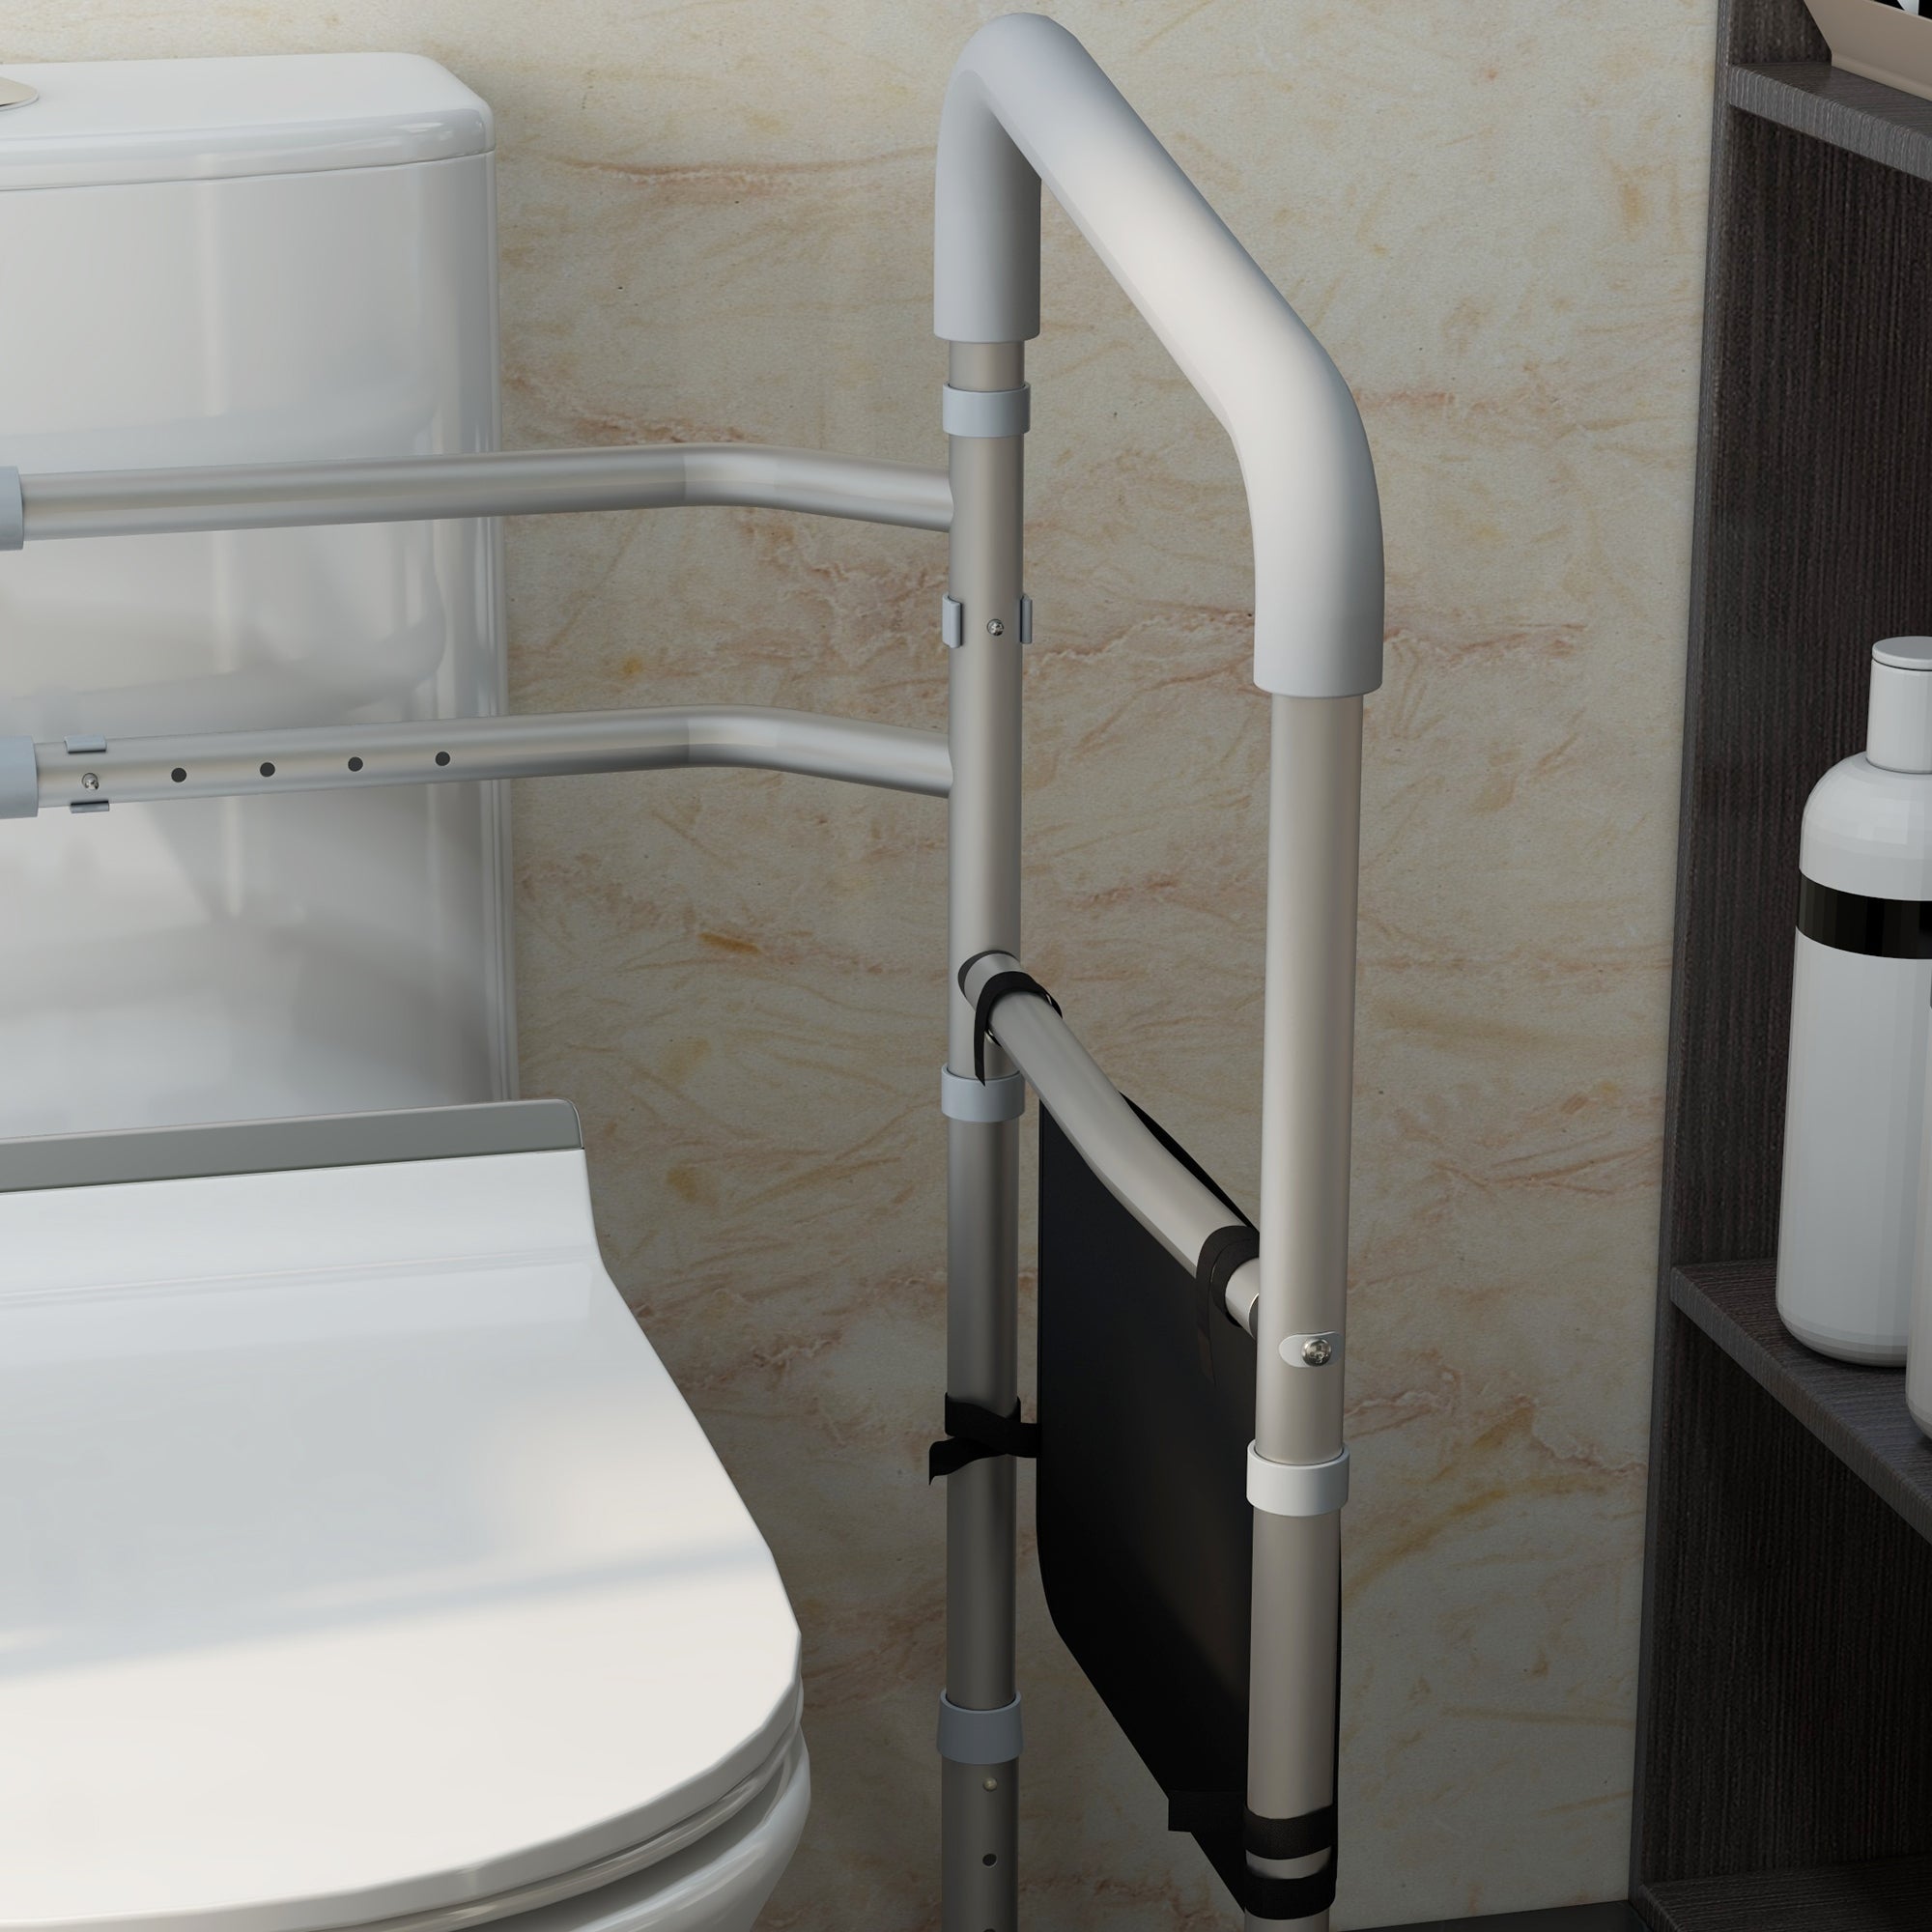 HOMCOM Free Standing Toilet Frame, Height & Width Adjustable Toilet Safety Frame w/ Arms, Additional Suction Cups, Handrail Grab Bar, 136kg Capacity - TovaHaus